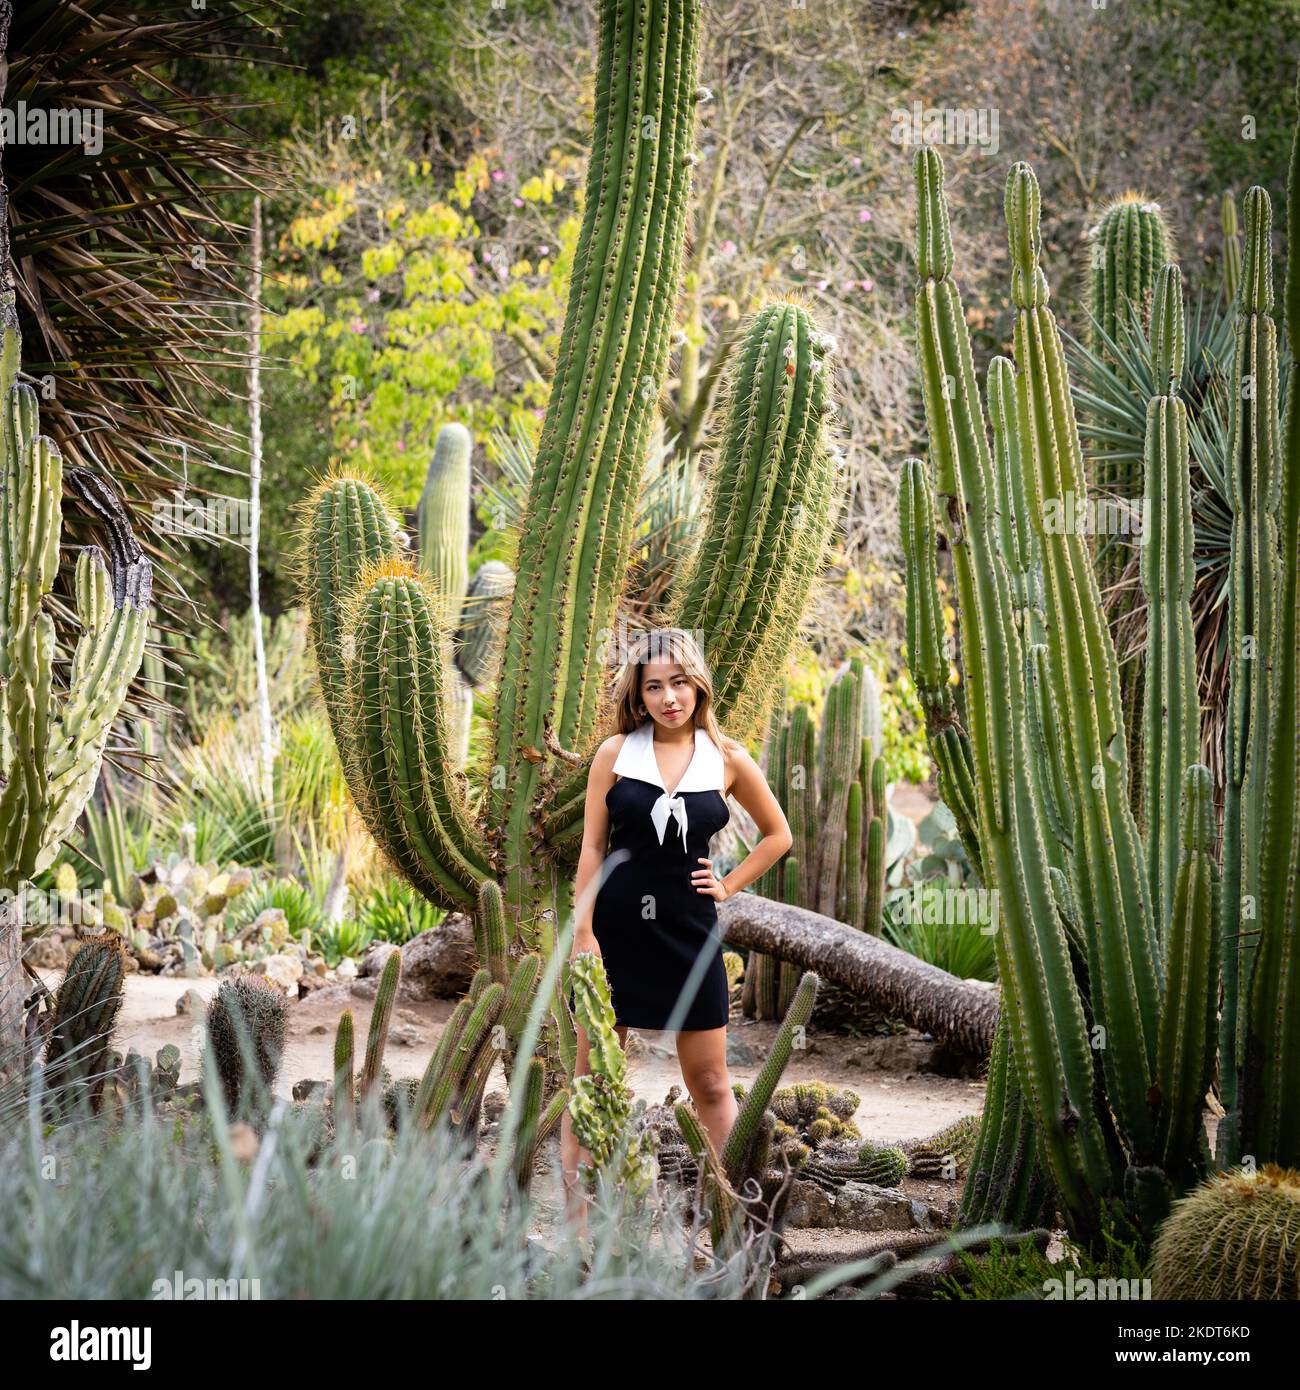 Beautiful Young Woman Wearing a Short Black and White Dress Standing in a Cactus Garden | Desert Scene Stock Photo